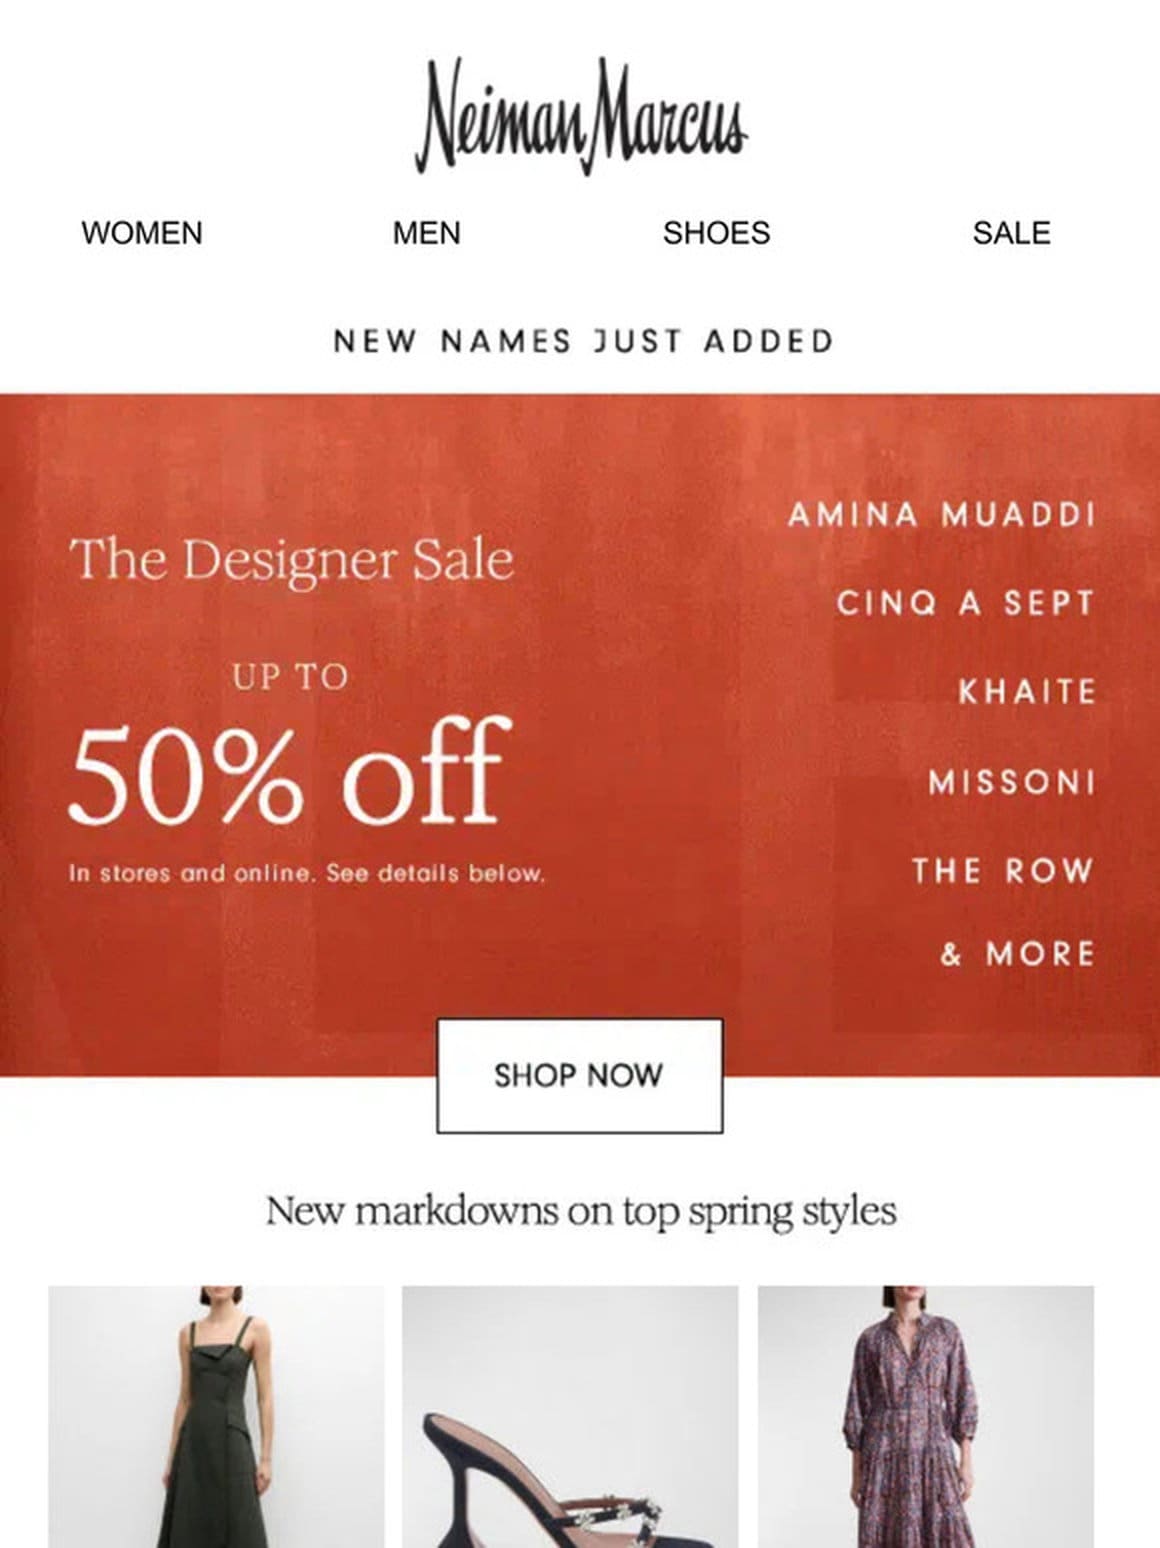 The Designer Sale continues… Up to 50% off